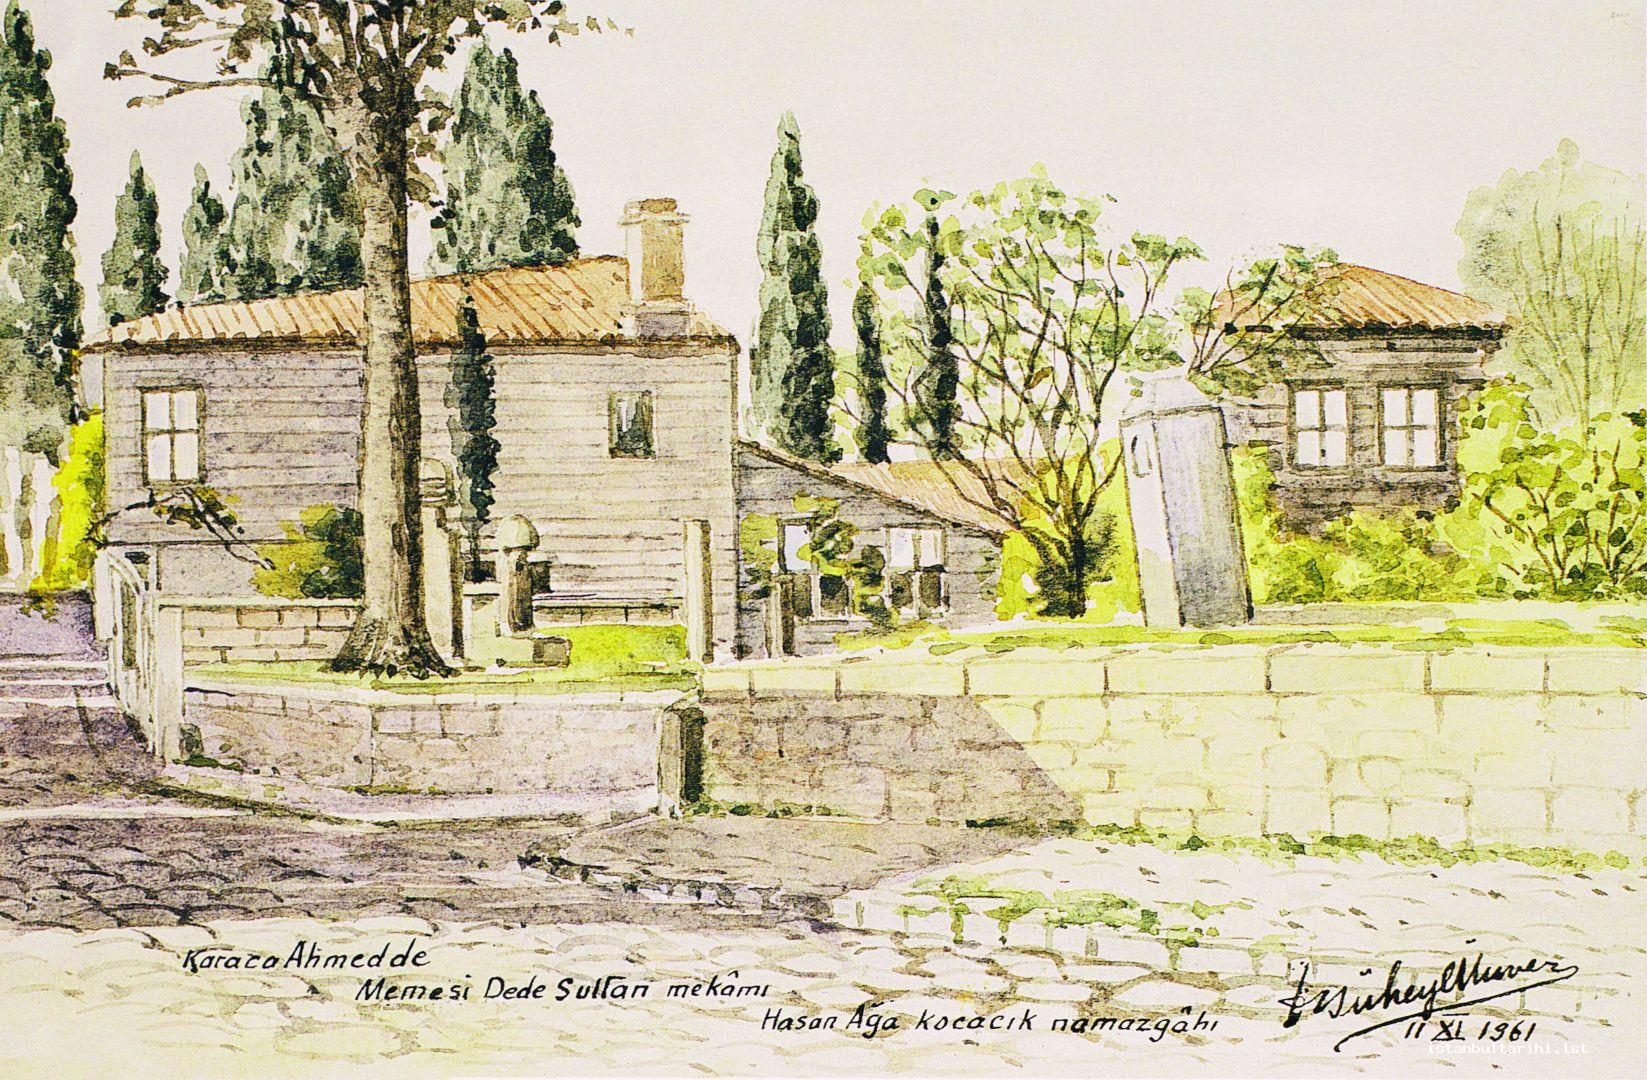 12- A. Süheyl Ünver was also closely interested in Karacaahmet cemetery and tried to attract the attention of authorities to the miserable state of this cemetery which was    the victim of great neglect and looting. In this painting, he depicted the tomb of Memesi Dede Sultan and Hasan Ağa Kocacık prayer house.